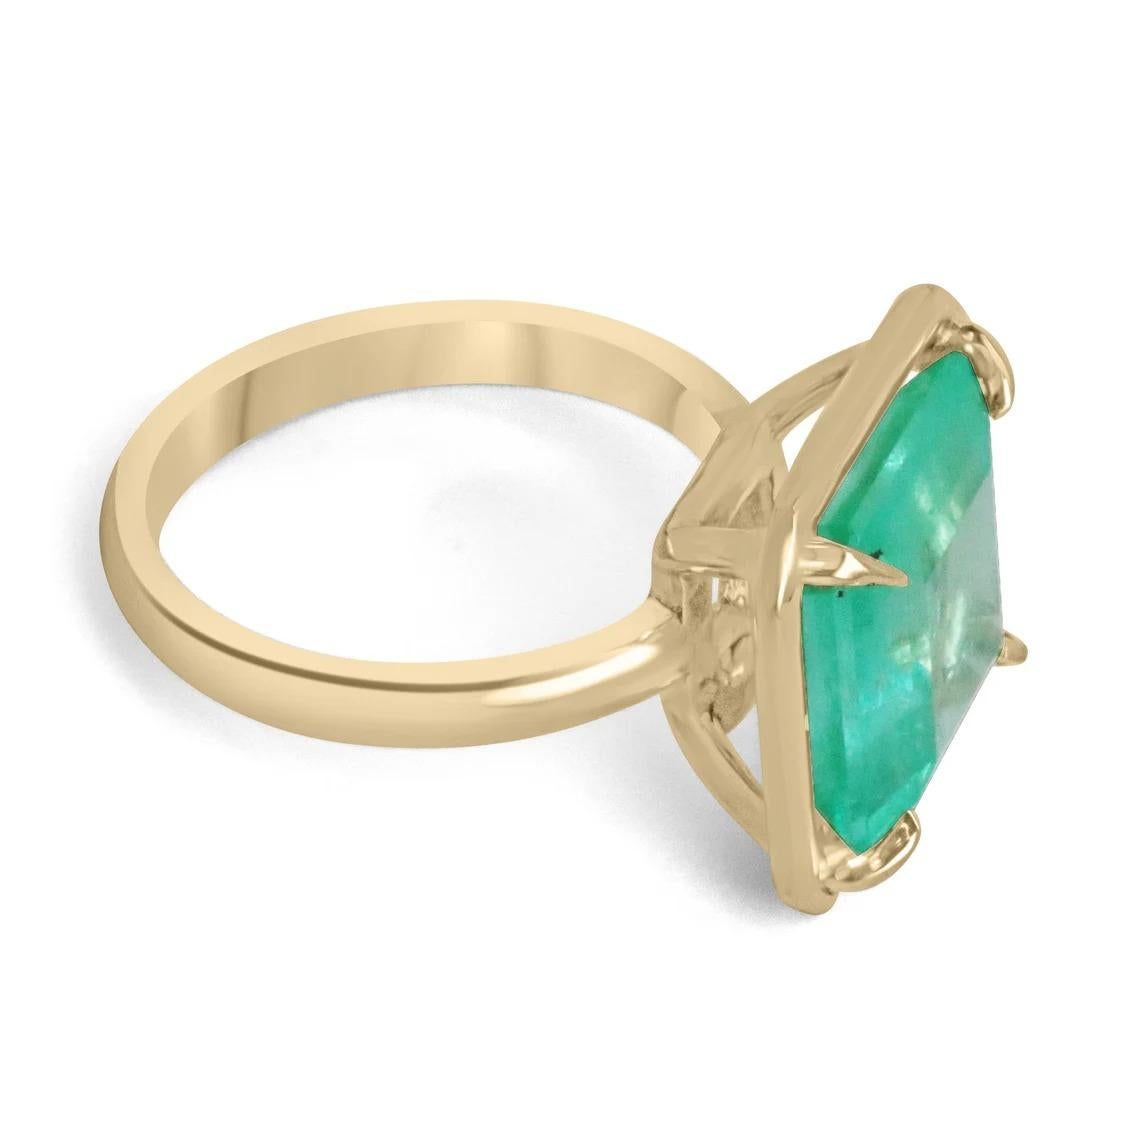 A simple, yet dramatic solitaire emerald ring. This gorgeous piece showcases a very large 7.40-carat, natural Colombian emerald in the cut of an asscher. With a gemstone this size, it is very rare to find a stone that displays such impressive and